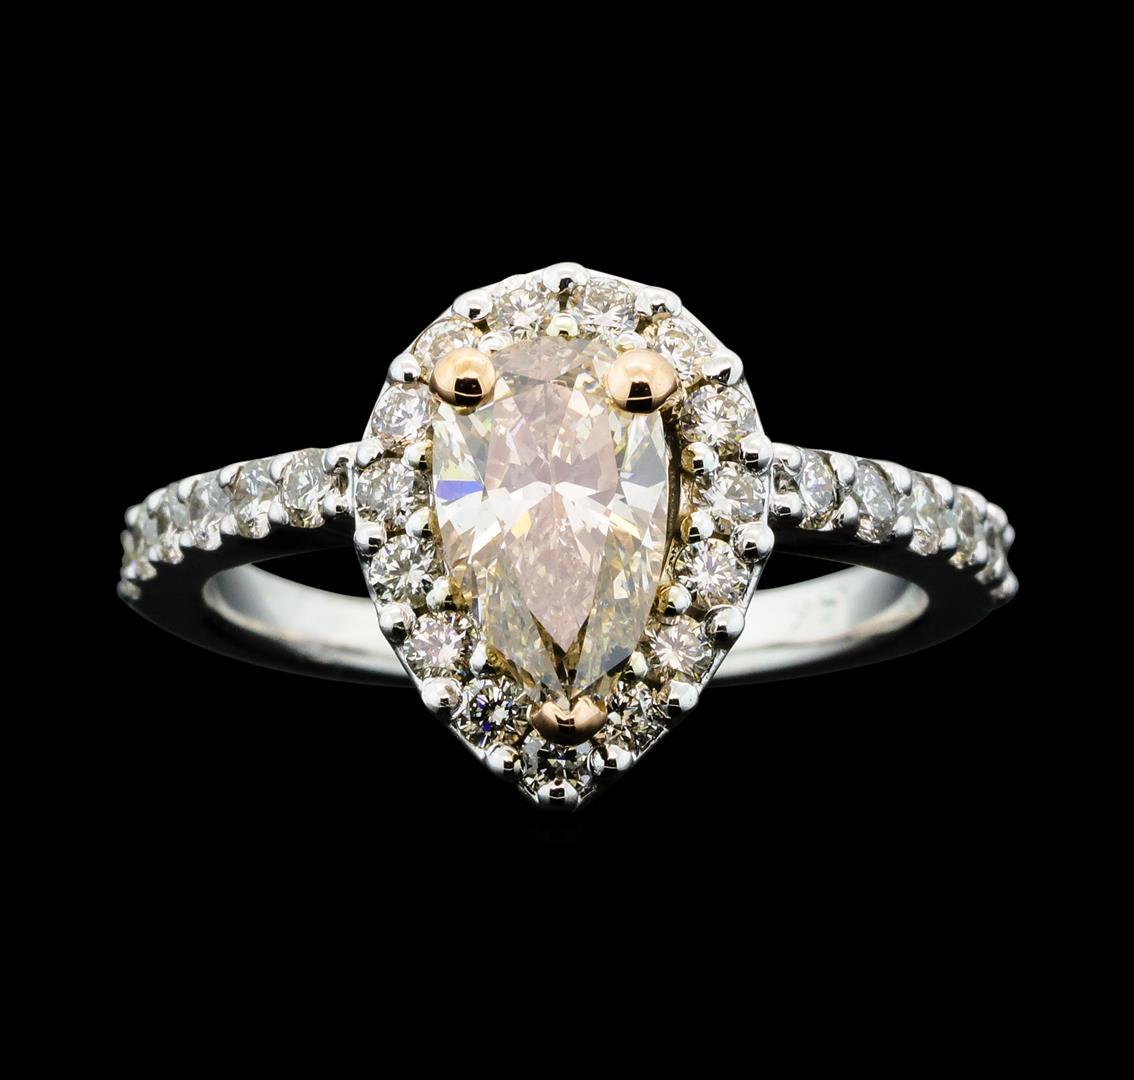 1.71 ctw Diamond Ring - 14KT Rose And White Gold